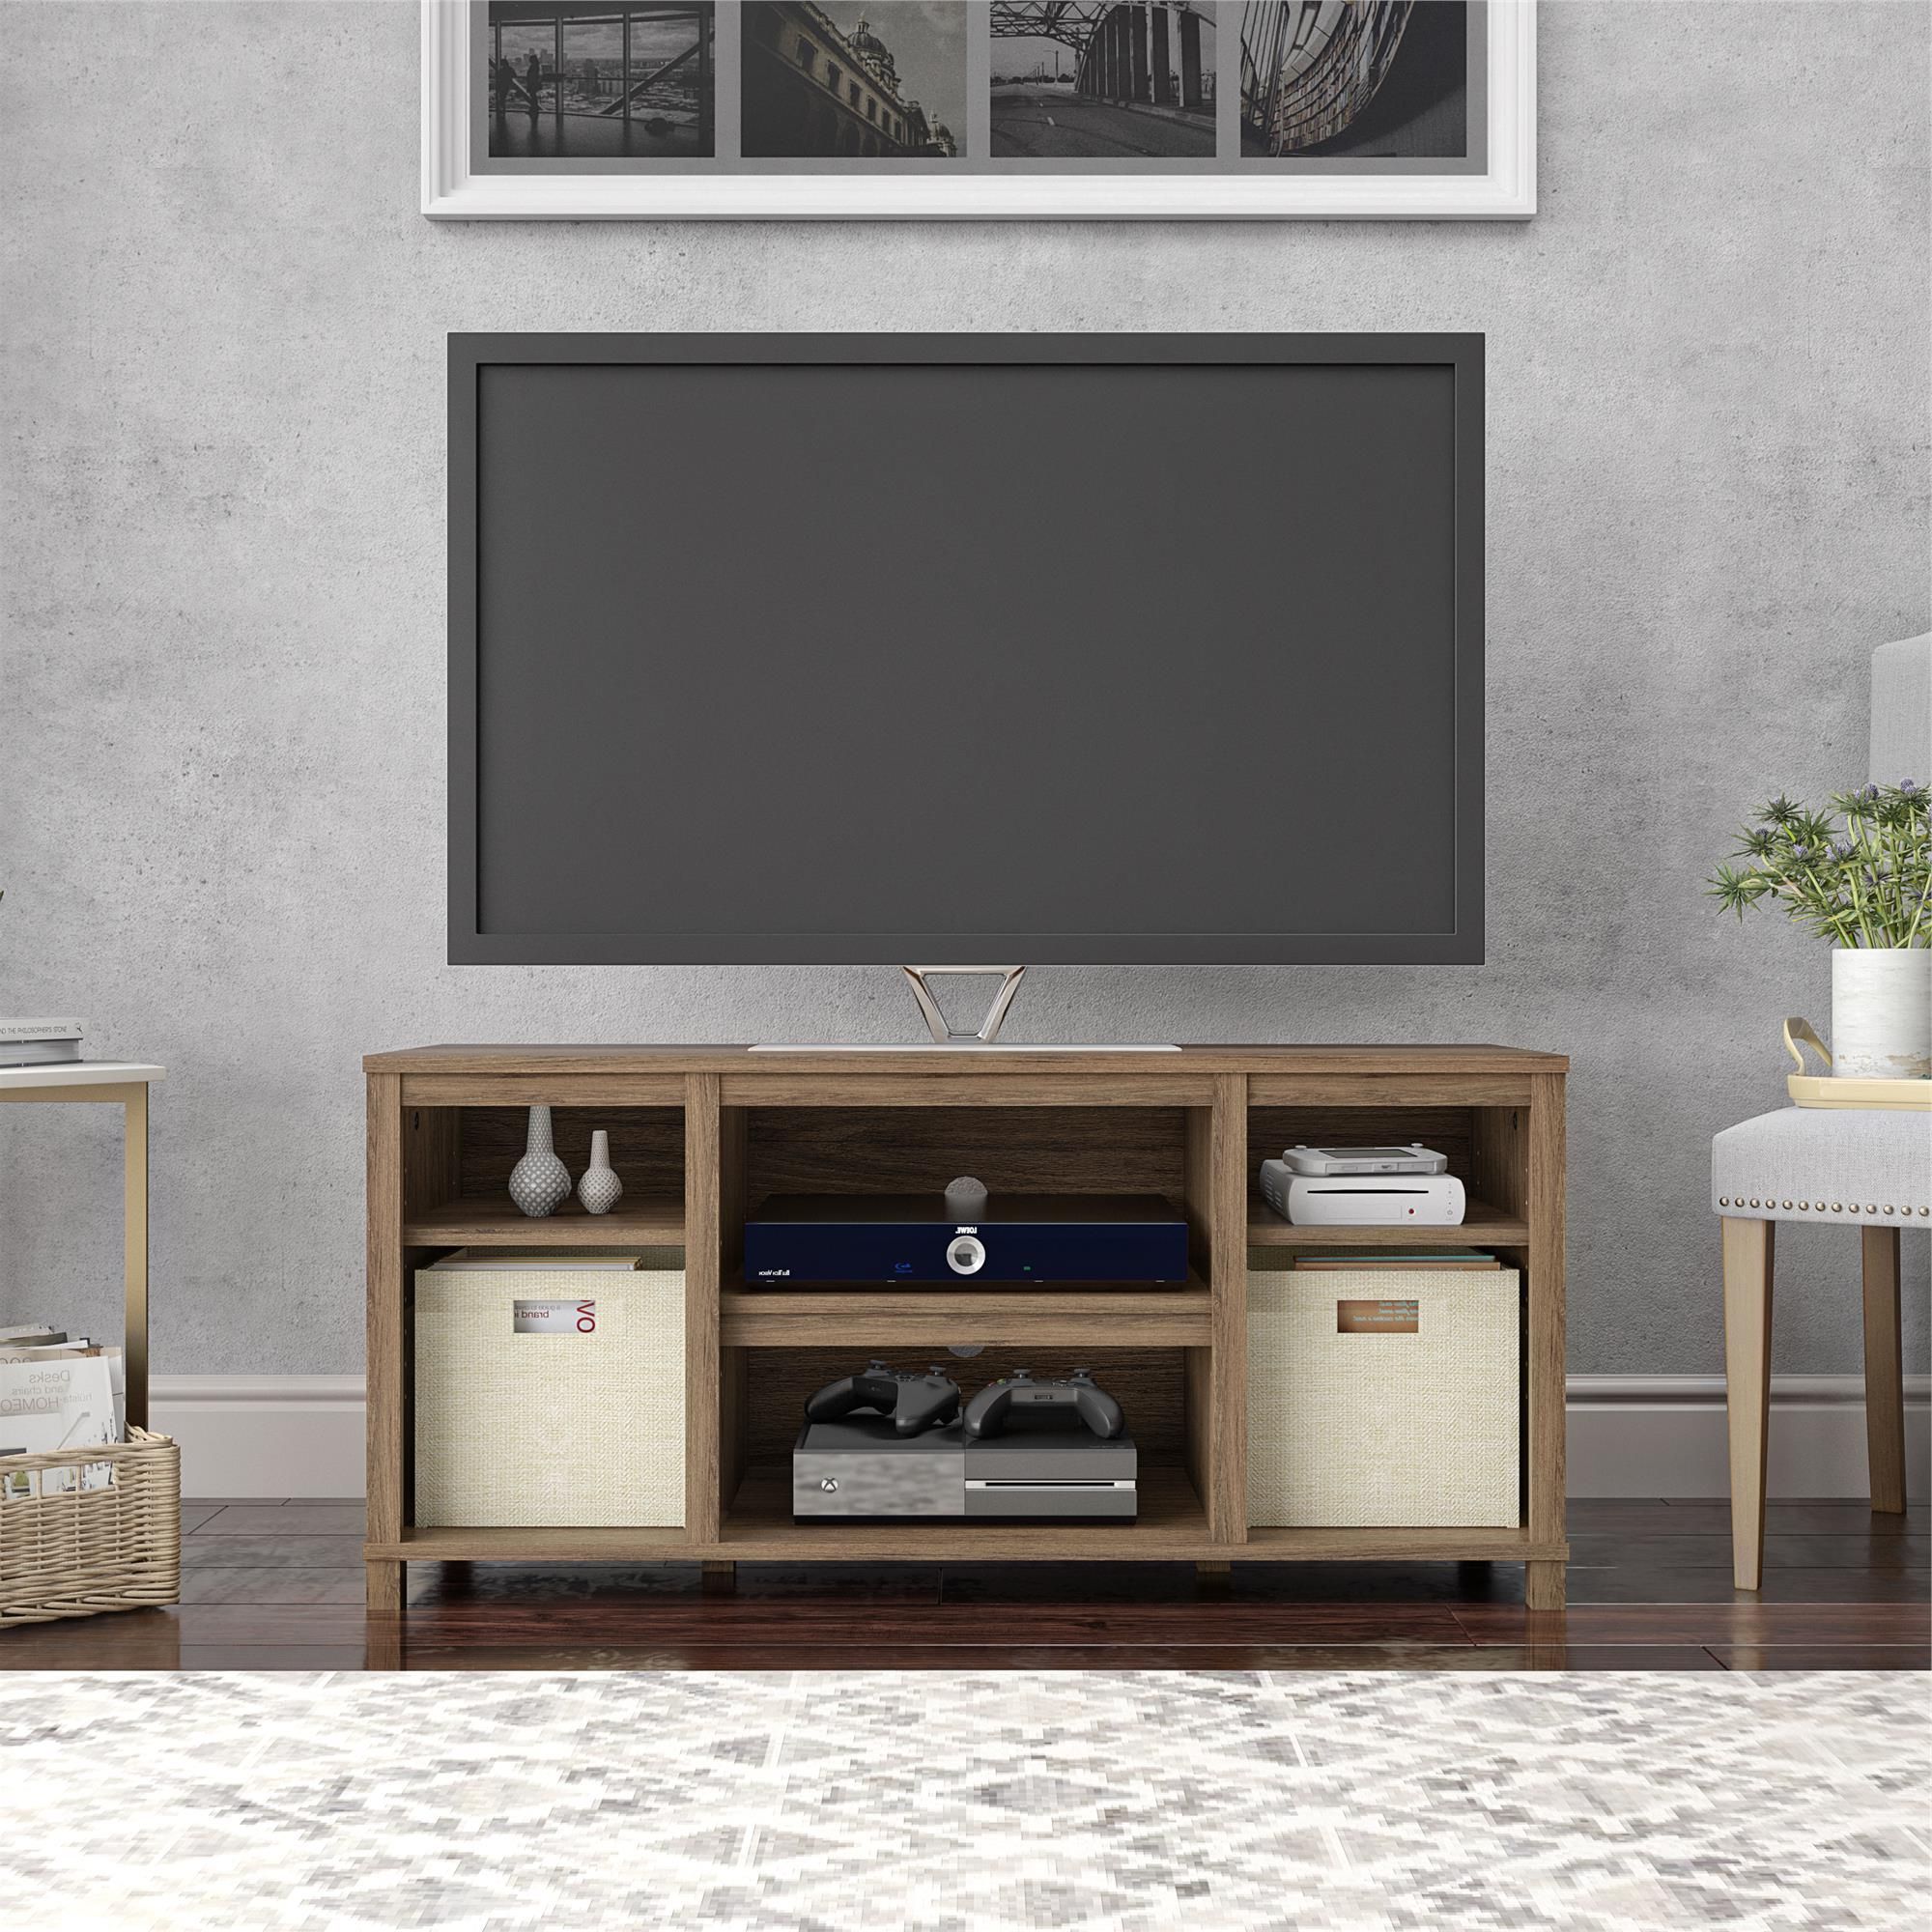 Mainstays Parsons Cubby Tv Stand For Tvs Up To 50", Rustic For Tv Stands For Tvs Up To 50" (Gallery 1 of 20)